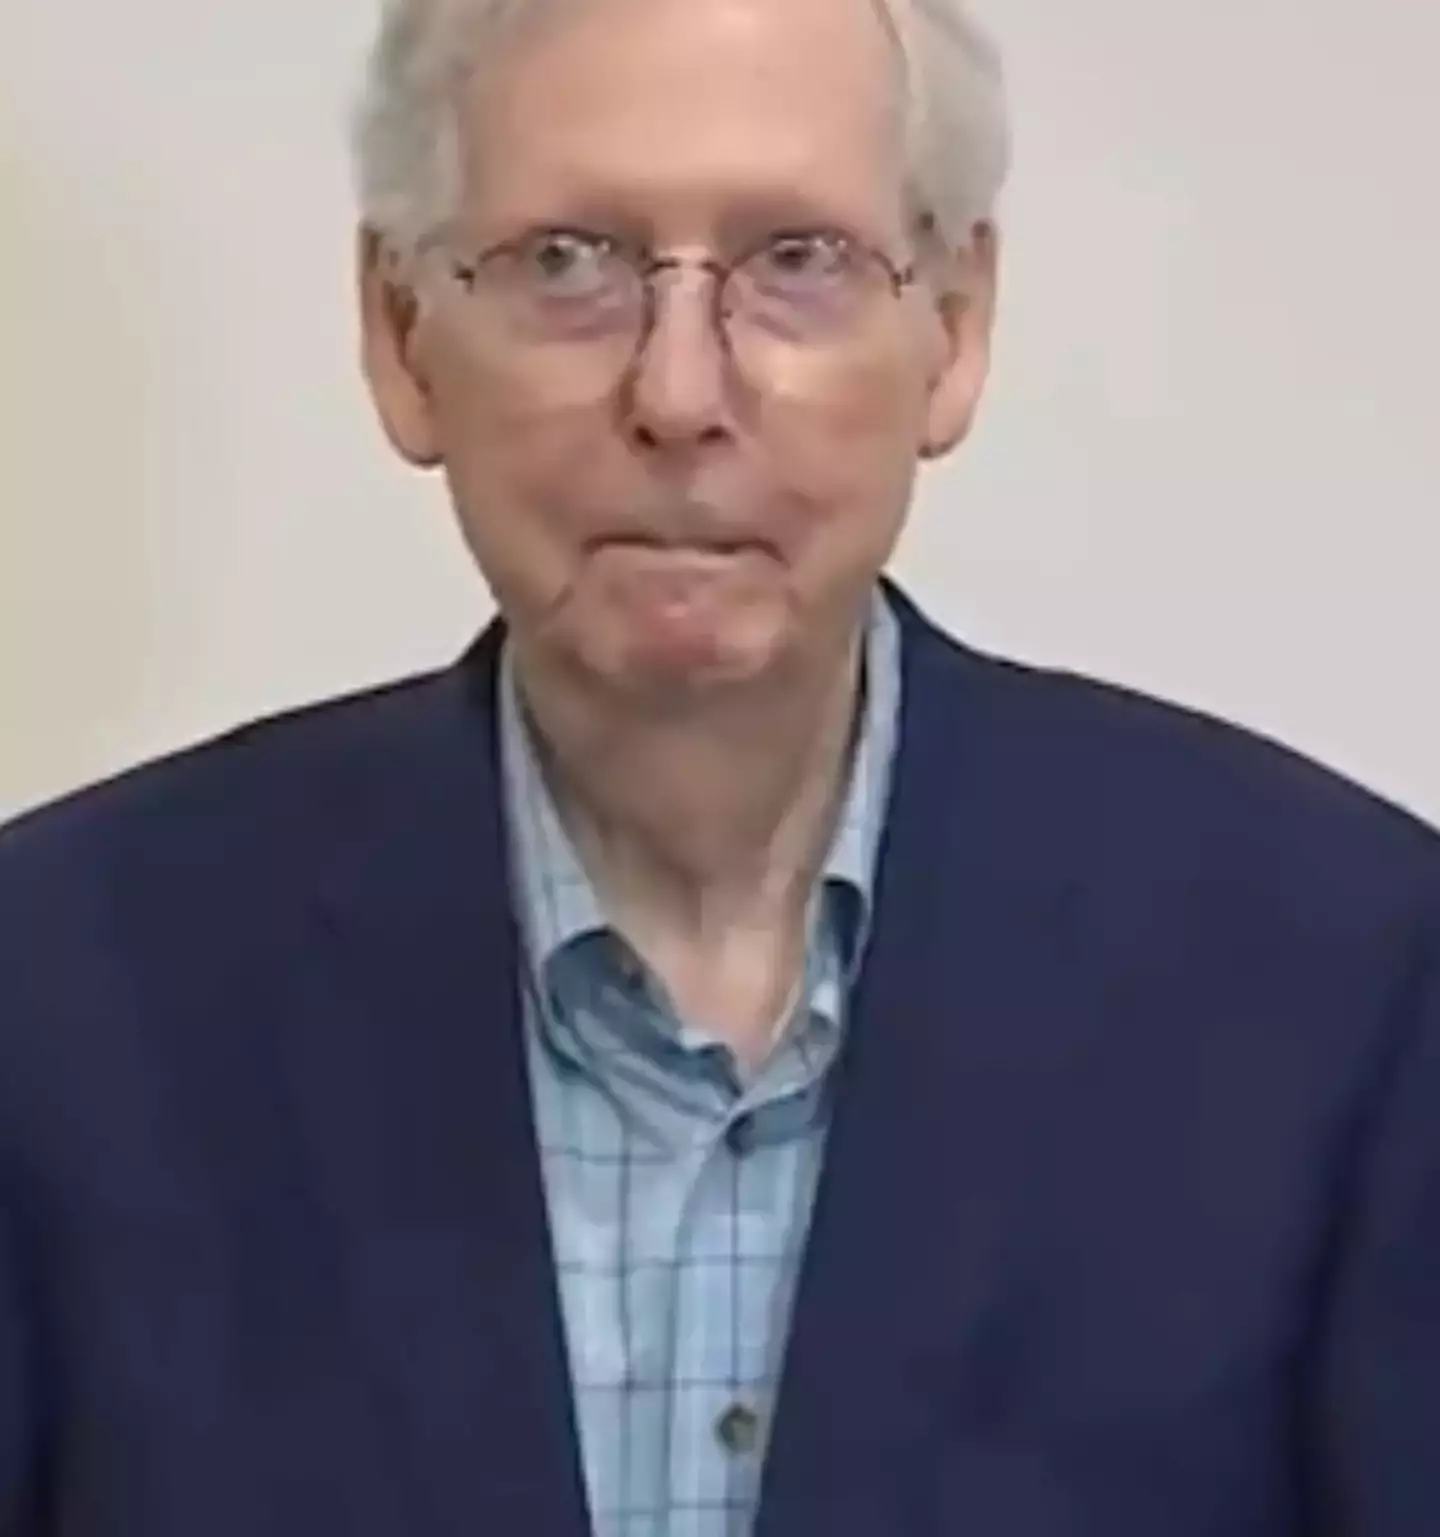 McConnell froze during a press conference.